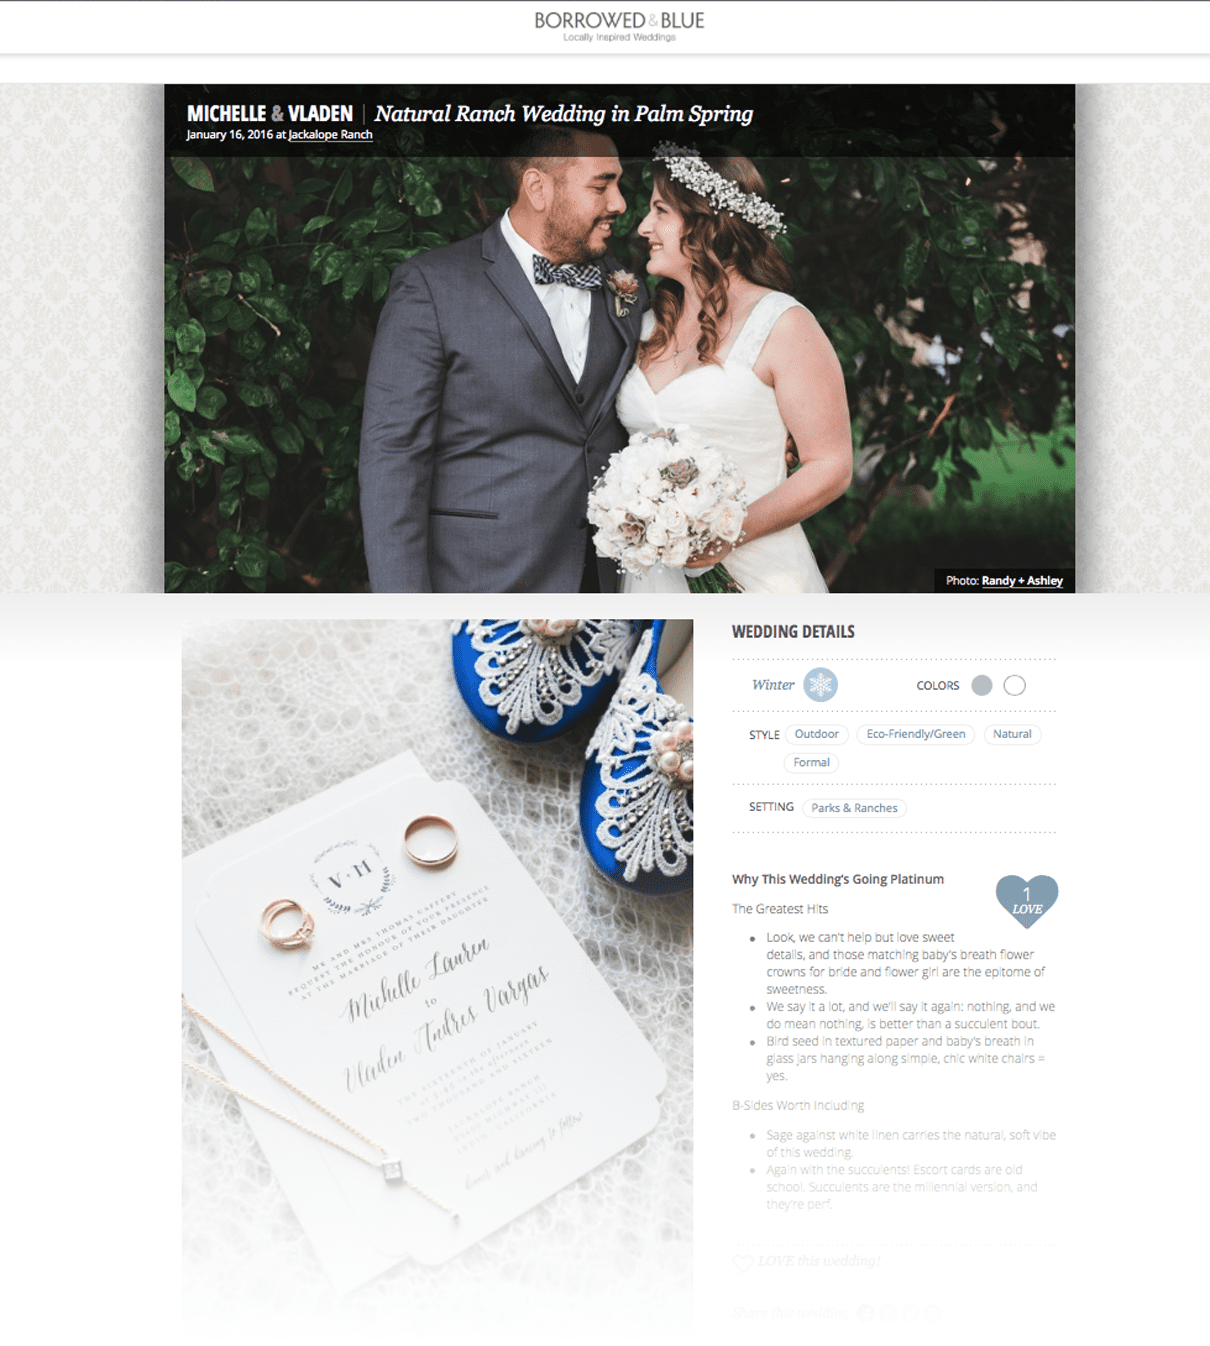 jackalope ranch wedding, borrowed and blue feature